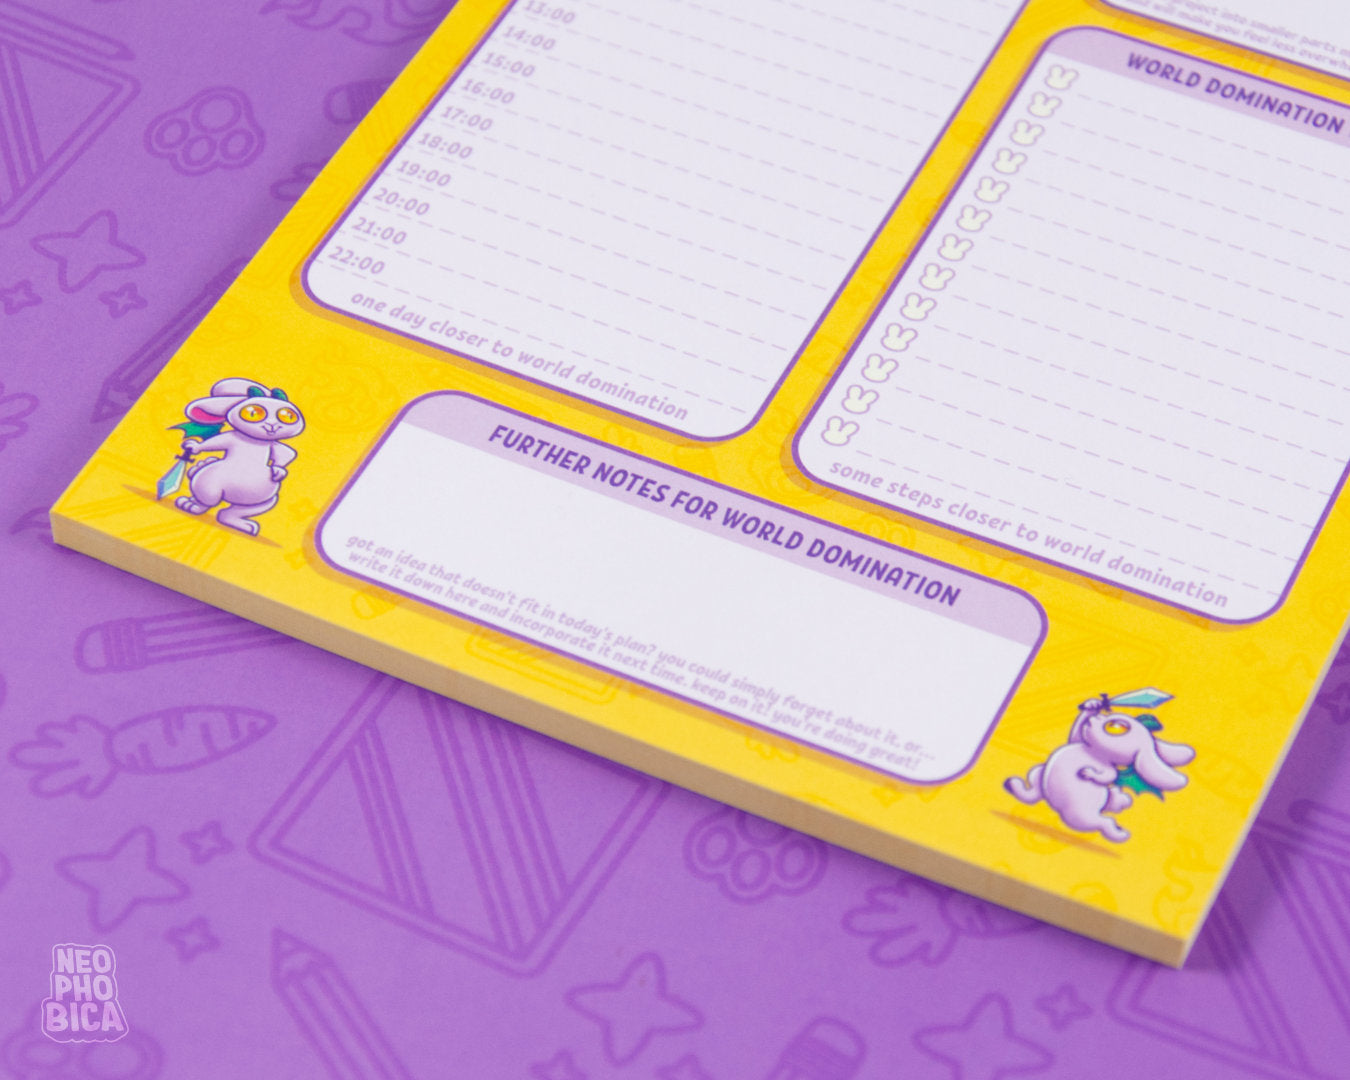 World Domination Planner - Note Pad